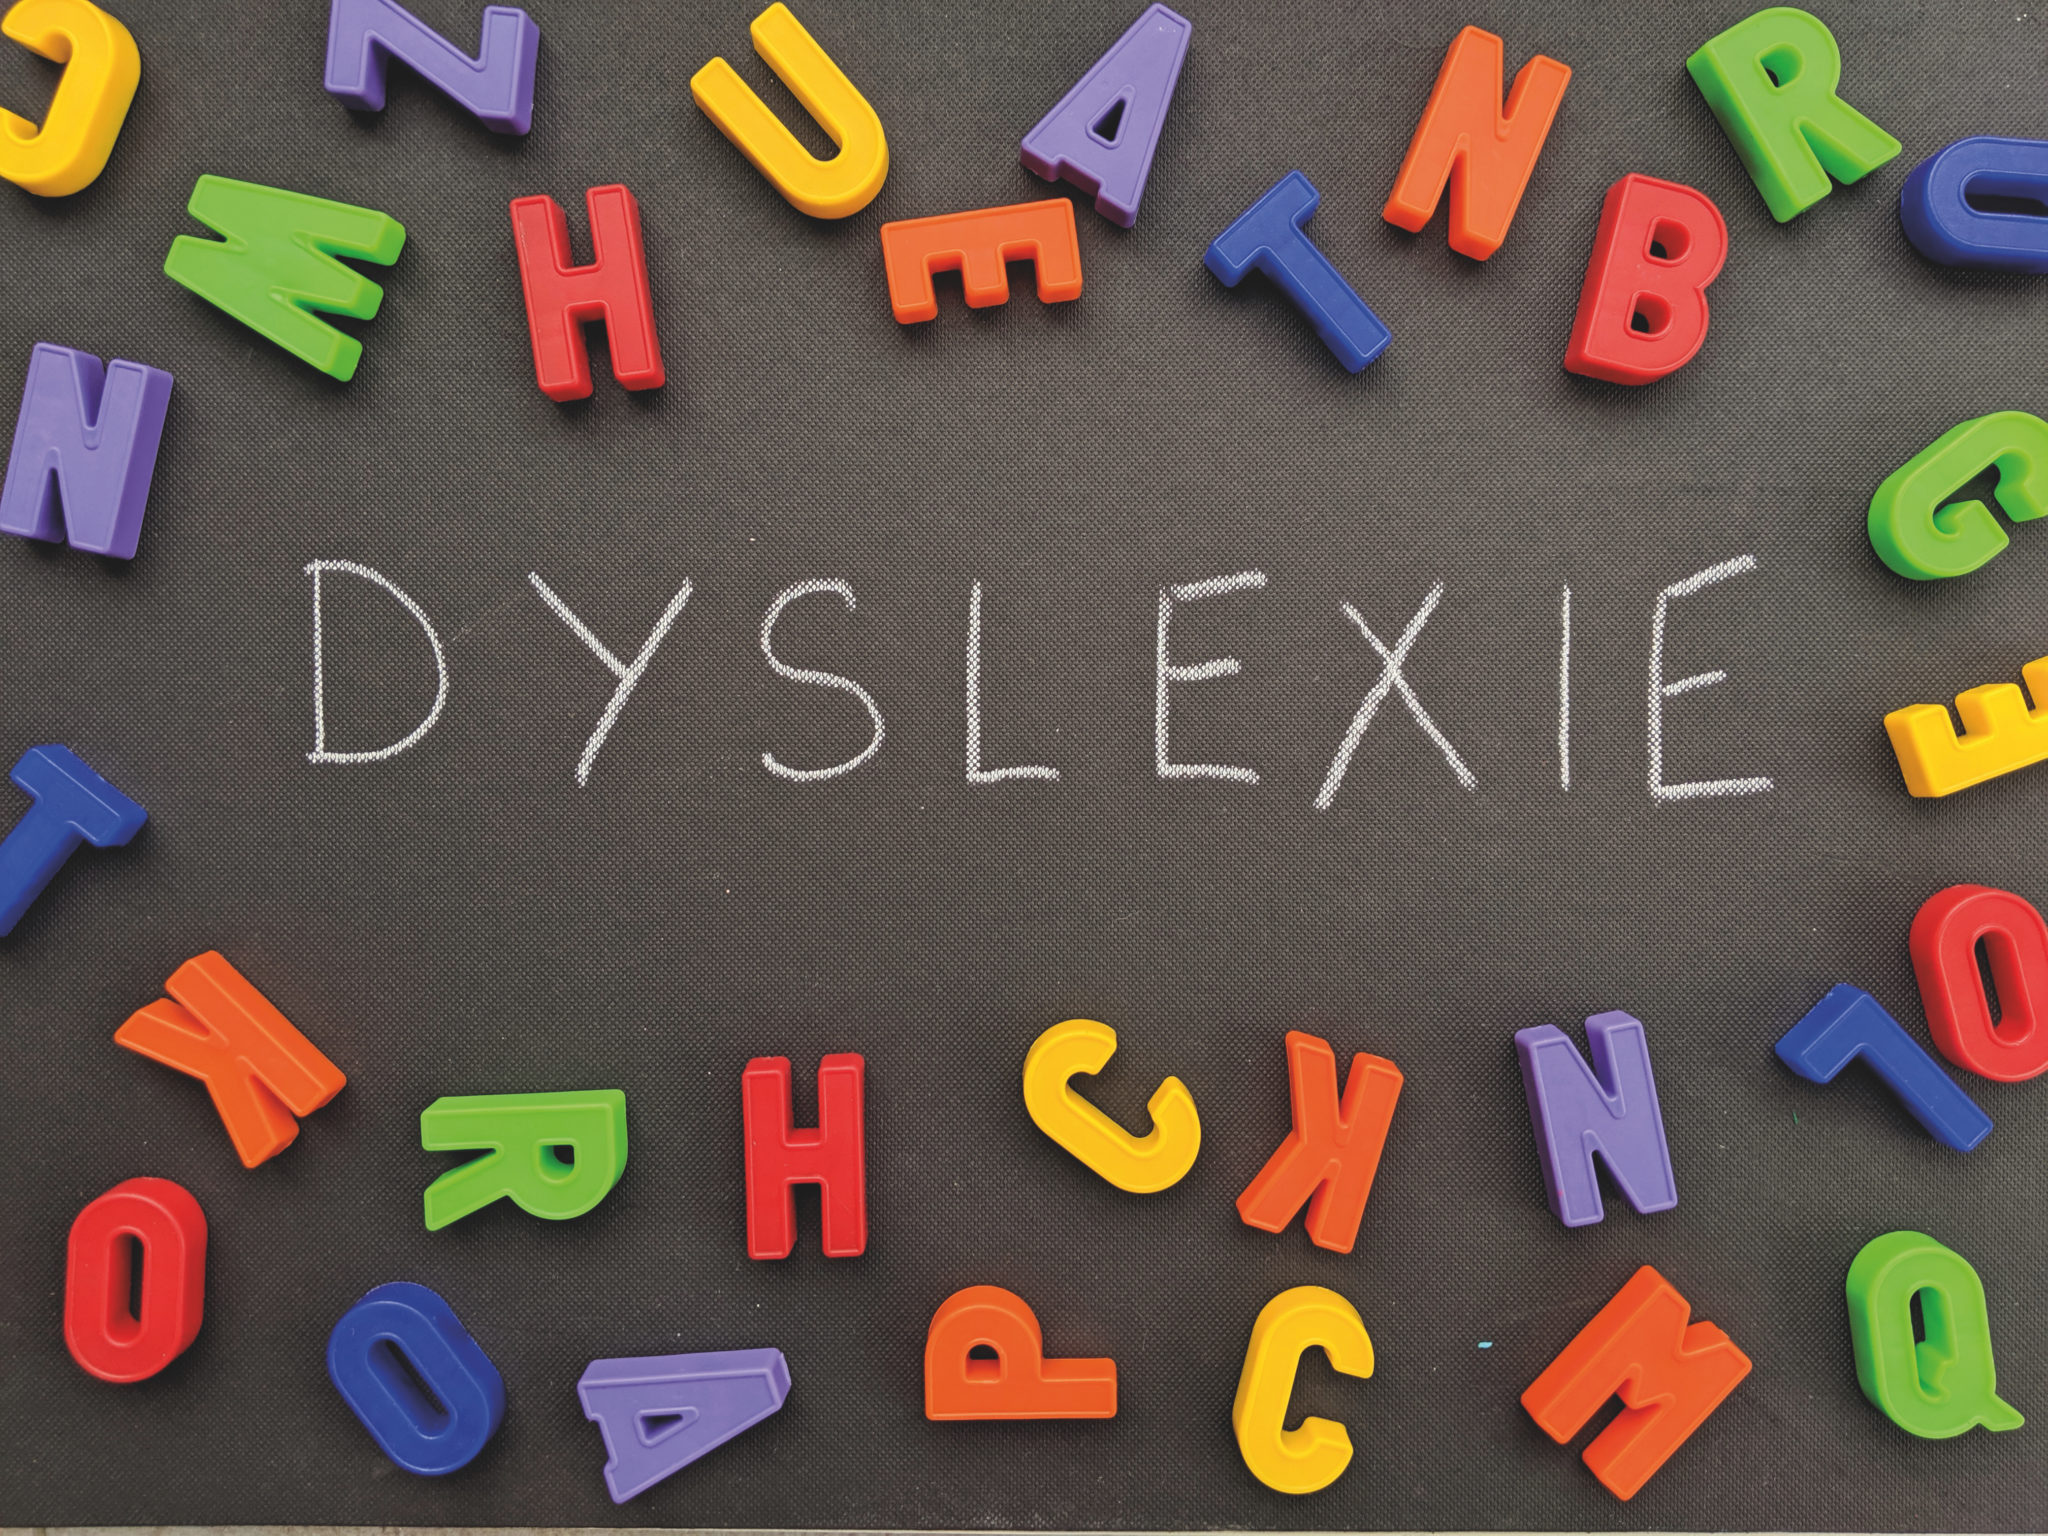 2019 10 08 Dyslexie conference